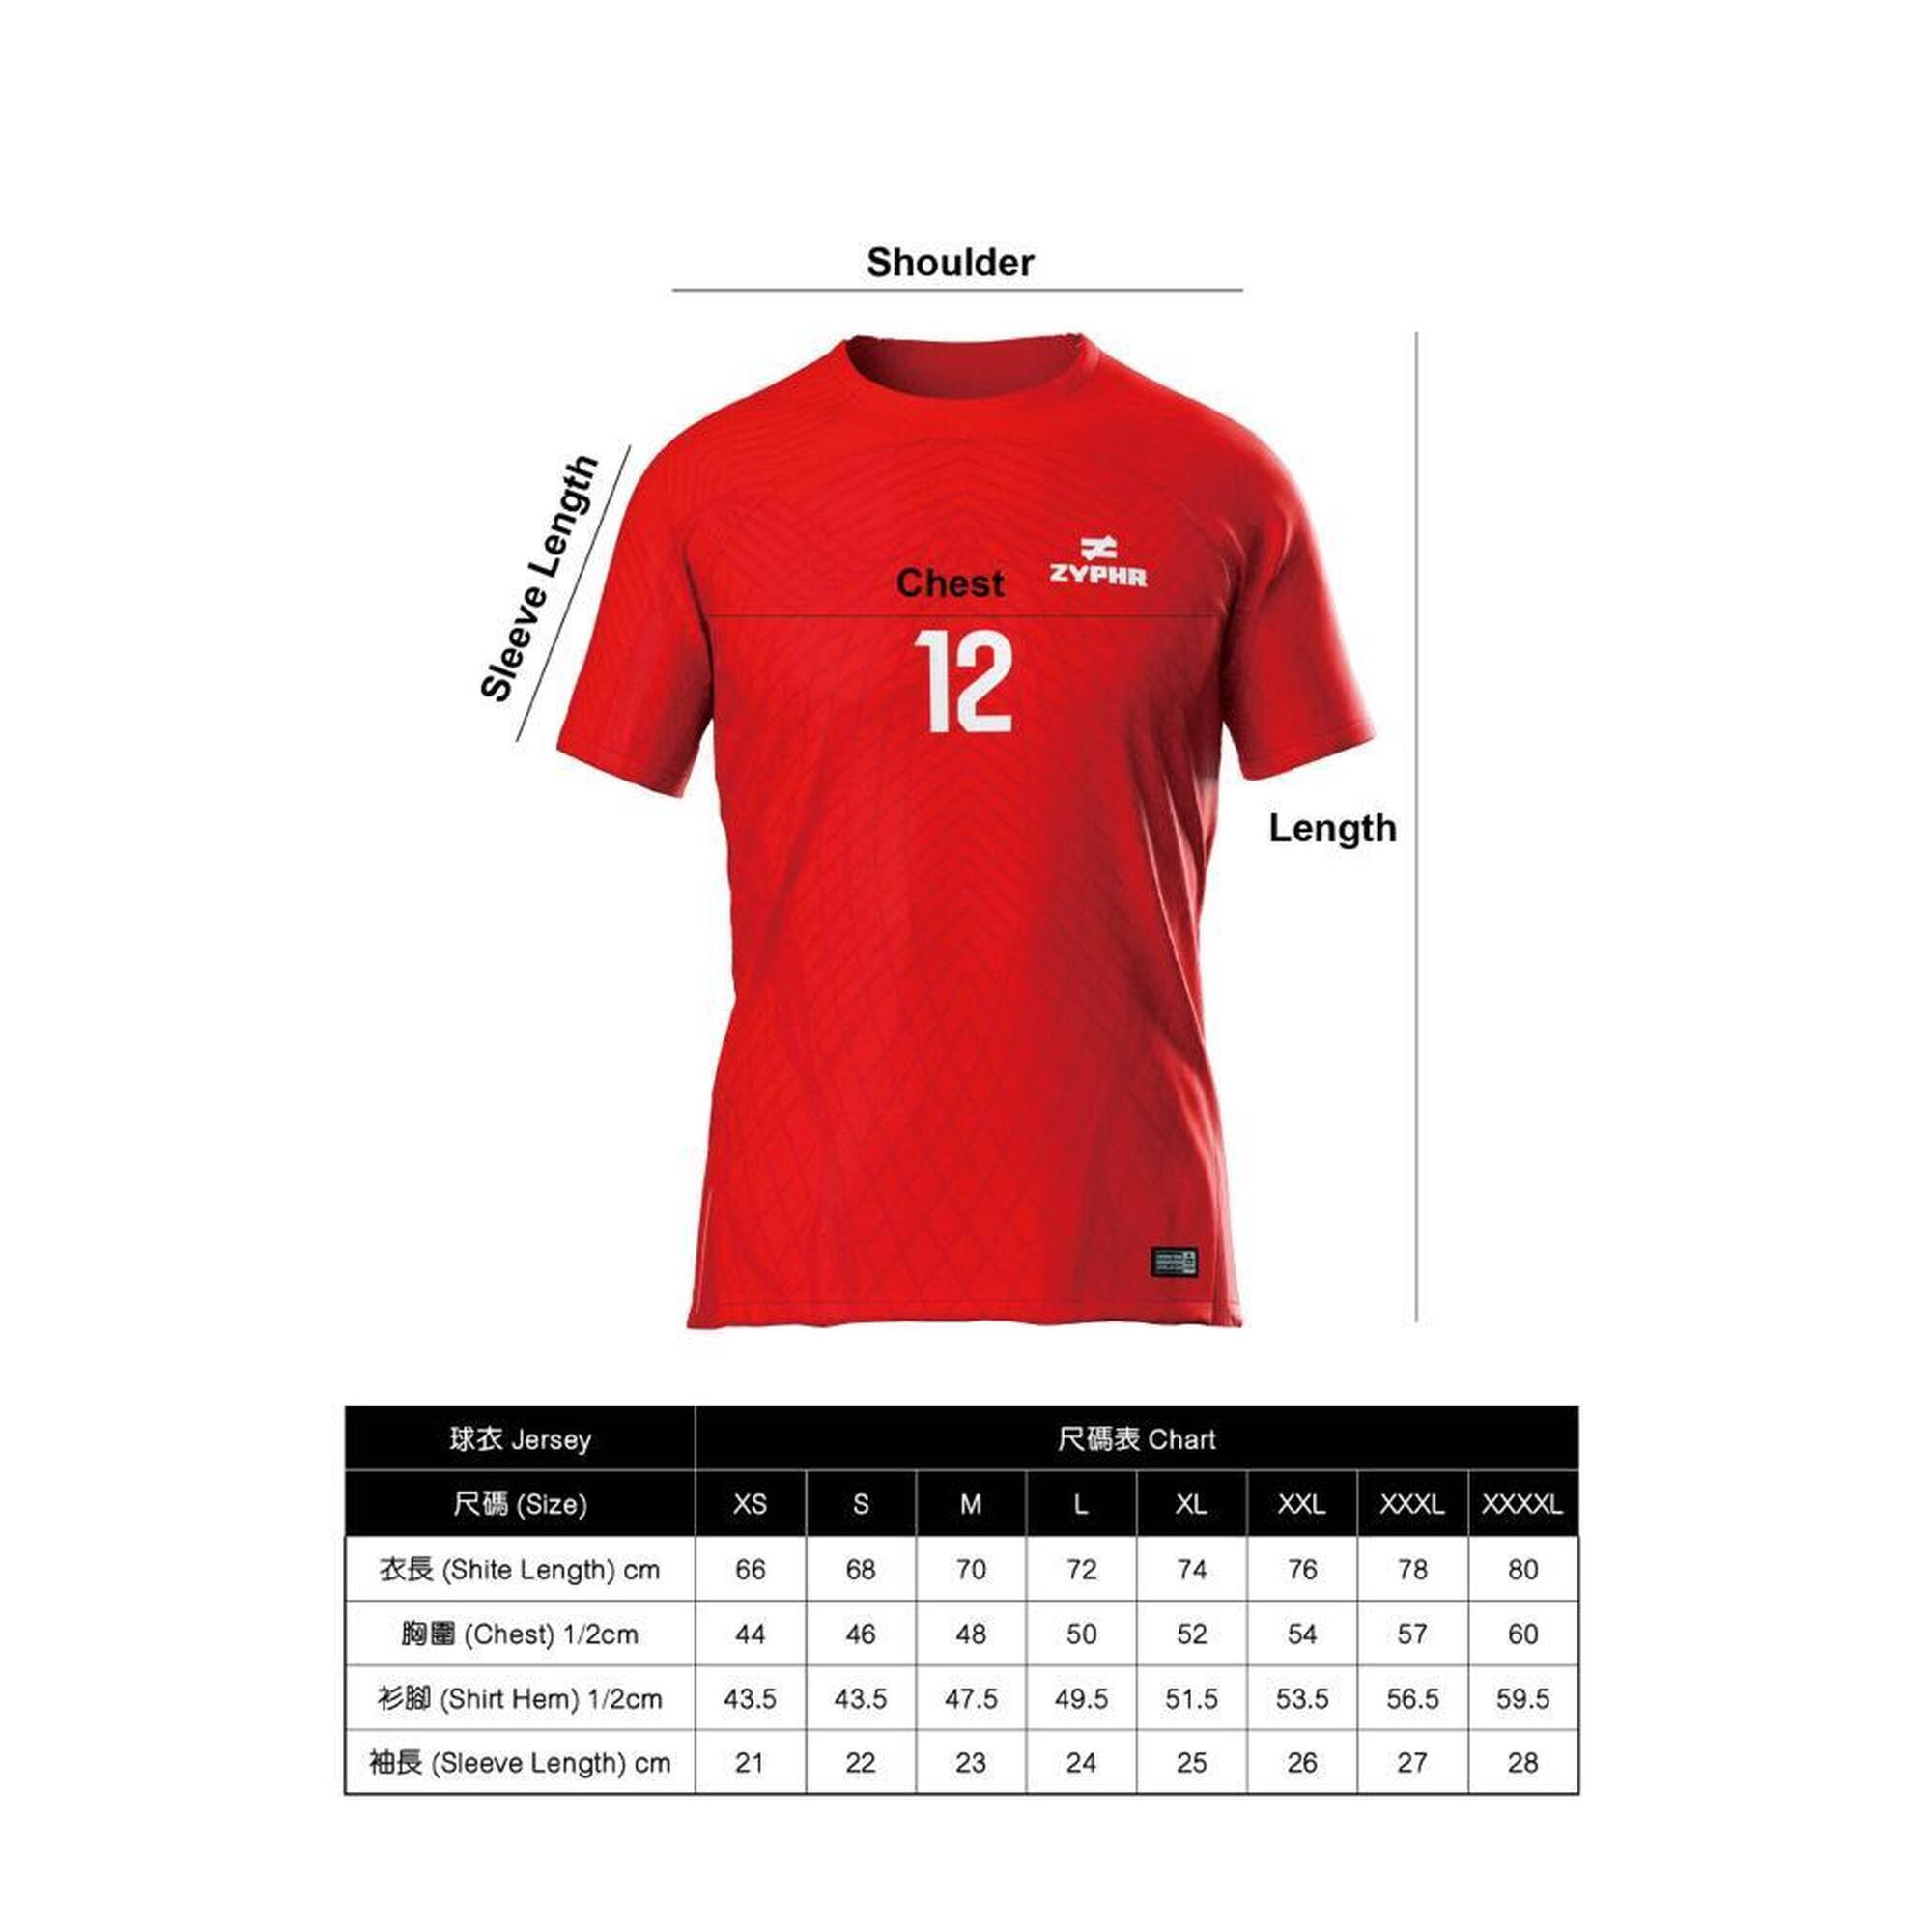 (Limited Stock) Hong Kong Fan Support Match Feel - Jersey (White - S)